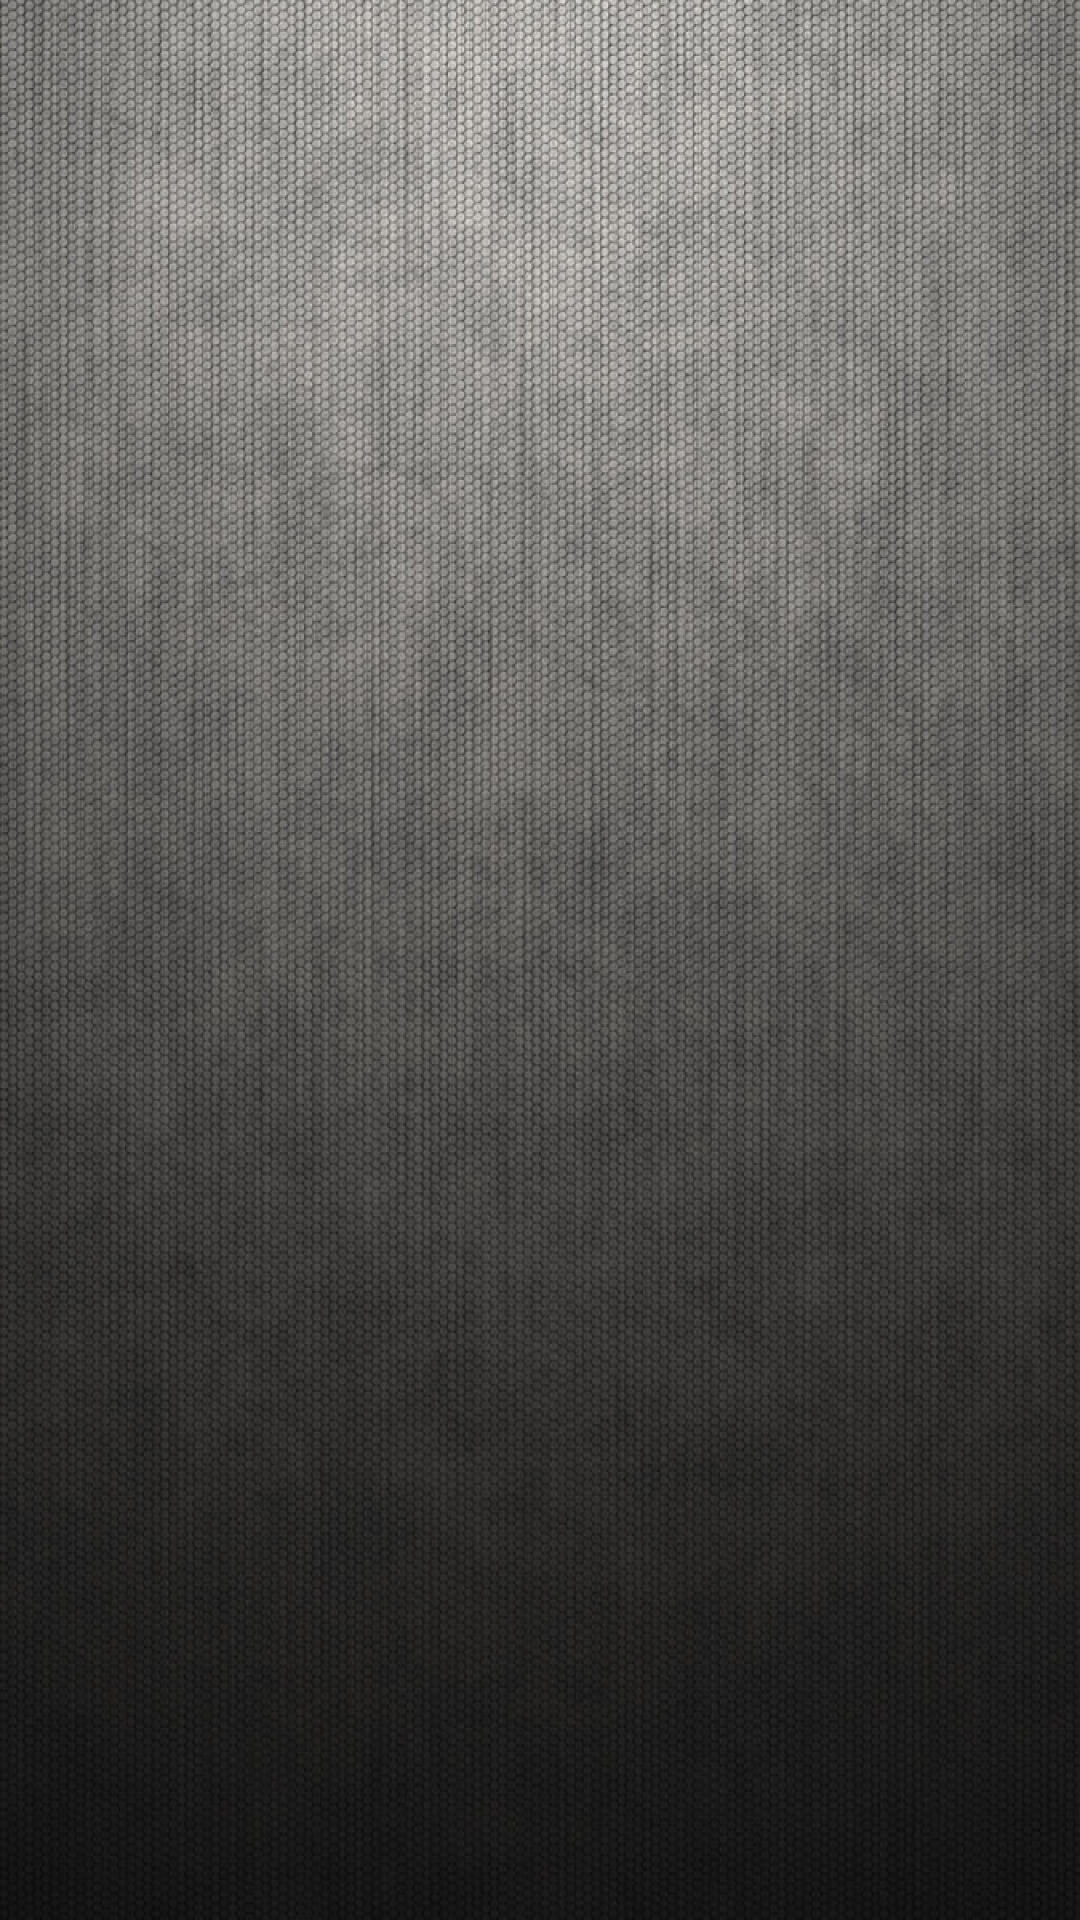 1080x1920 Loading Wallpaper Red Line Grey Background Android Wallpaper free